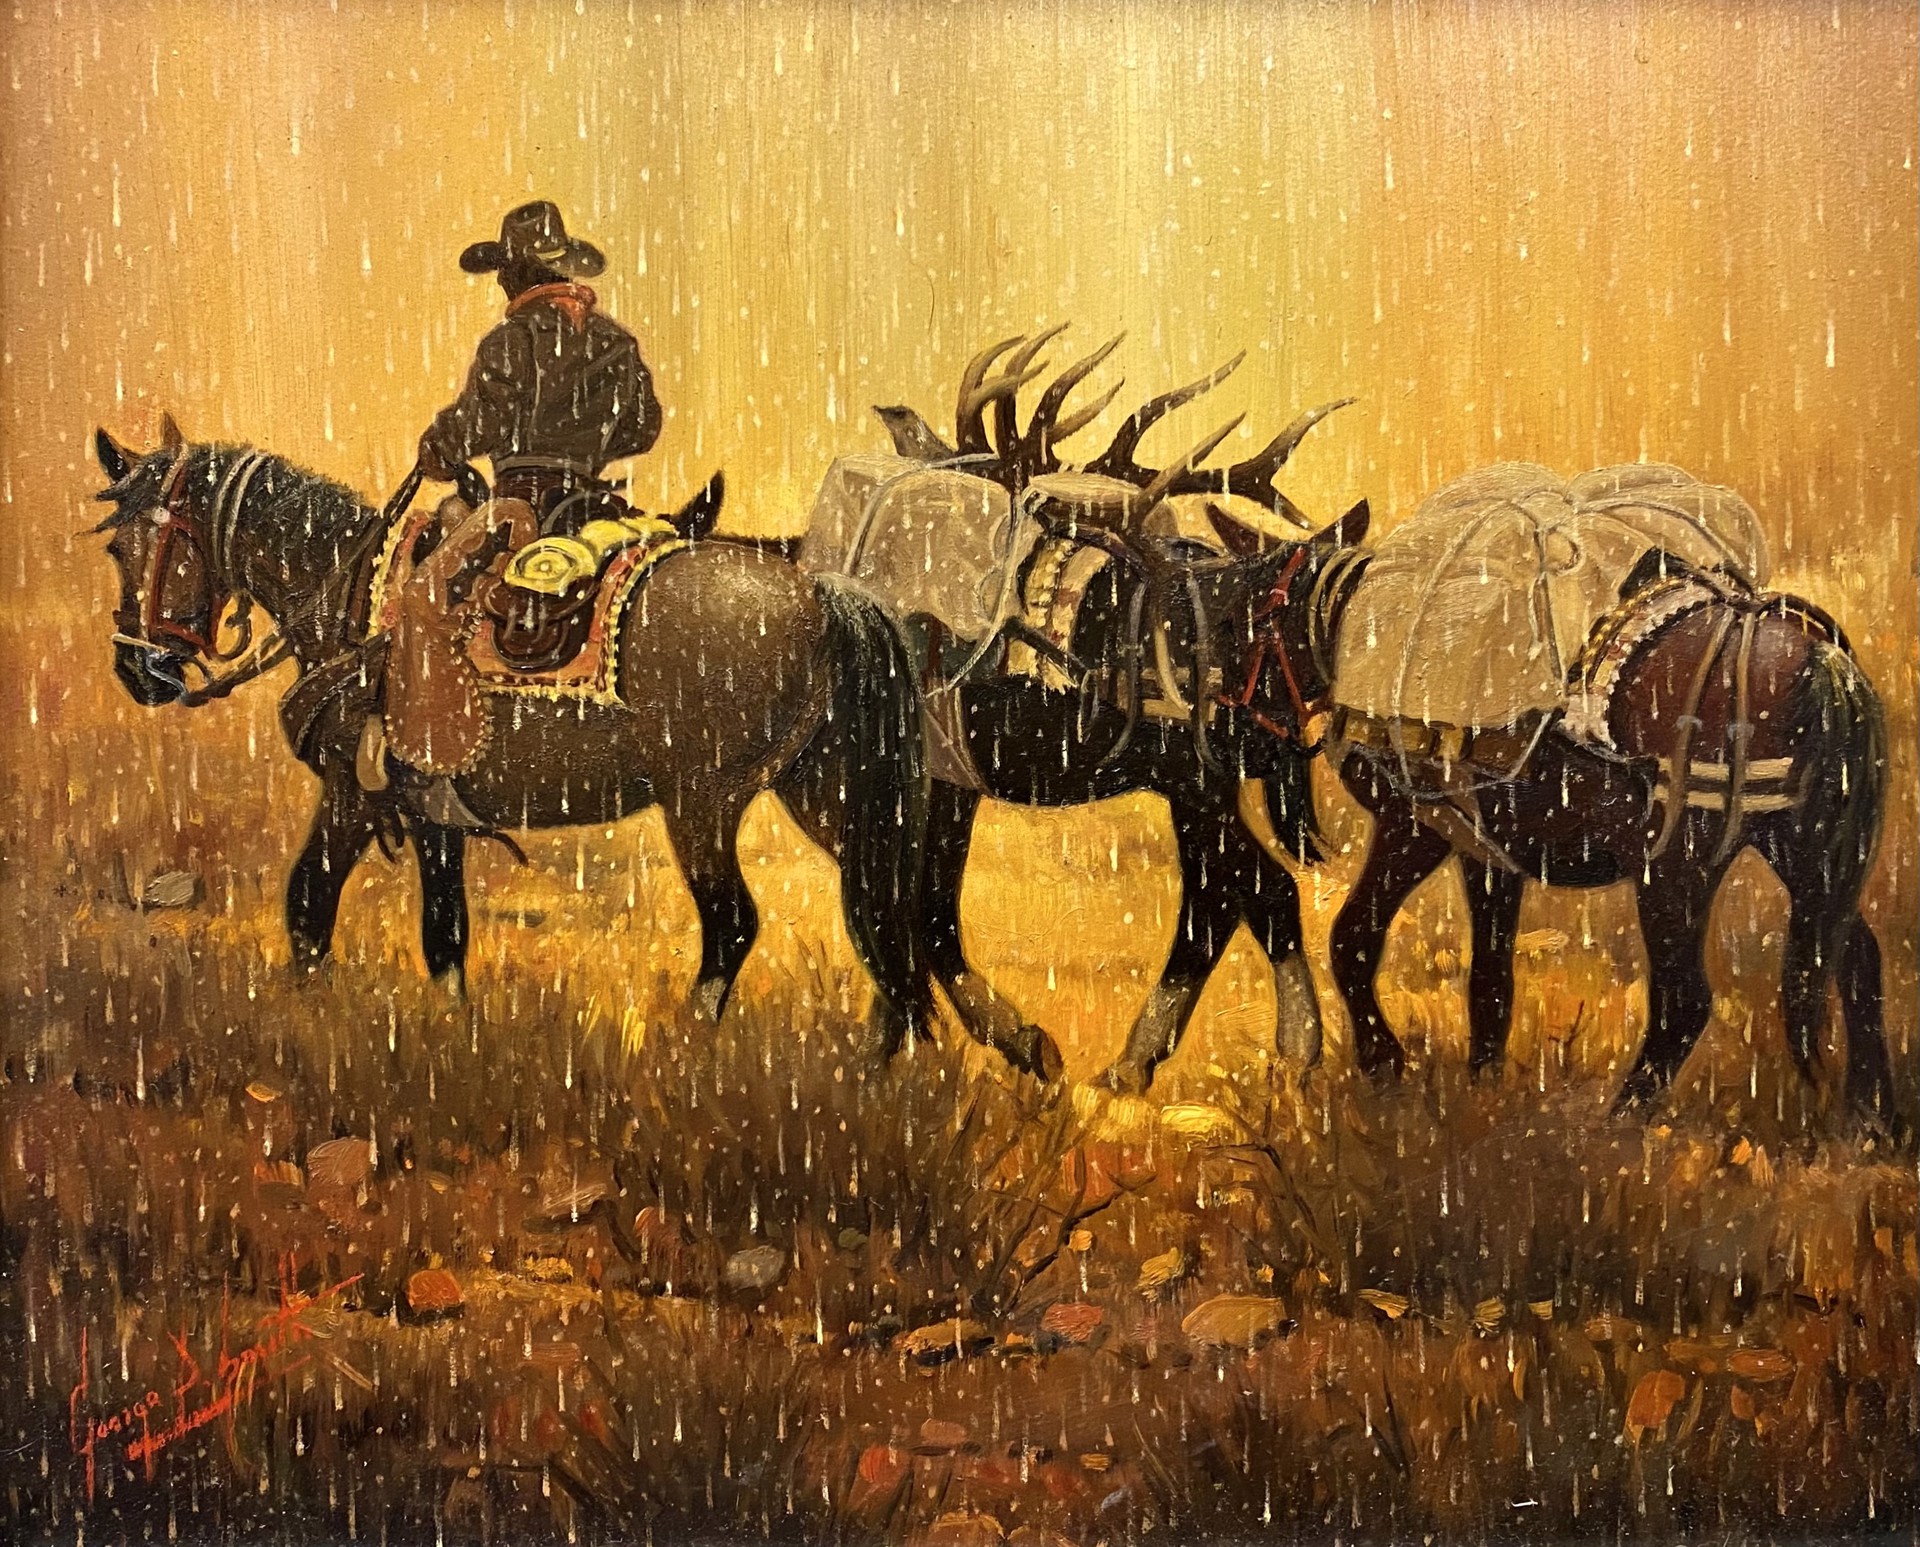 RAINY DAY PACKER by George "Dee" Smith